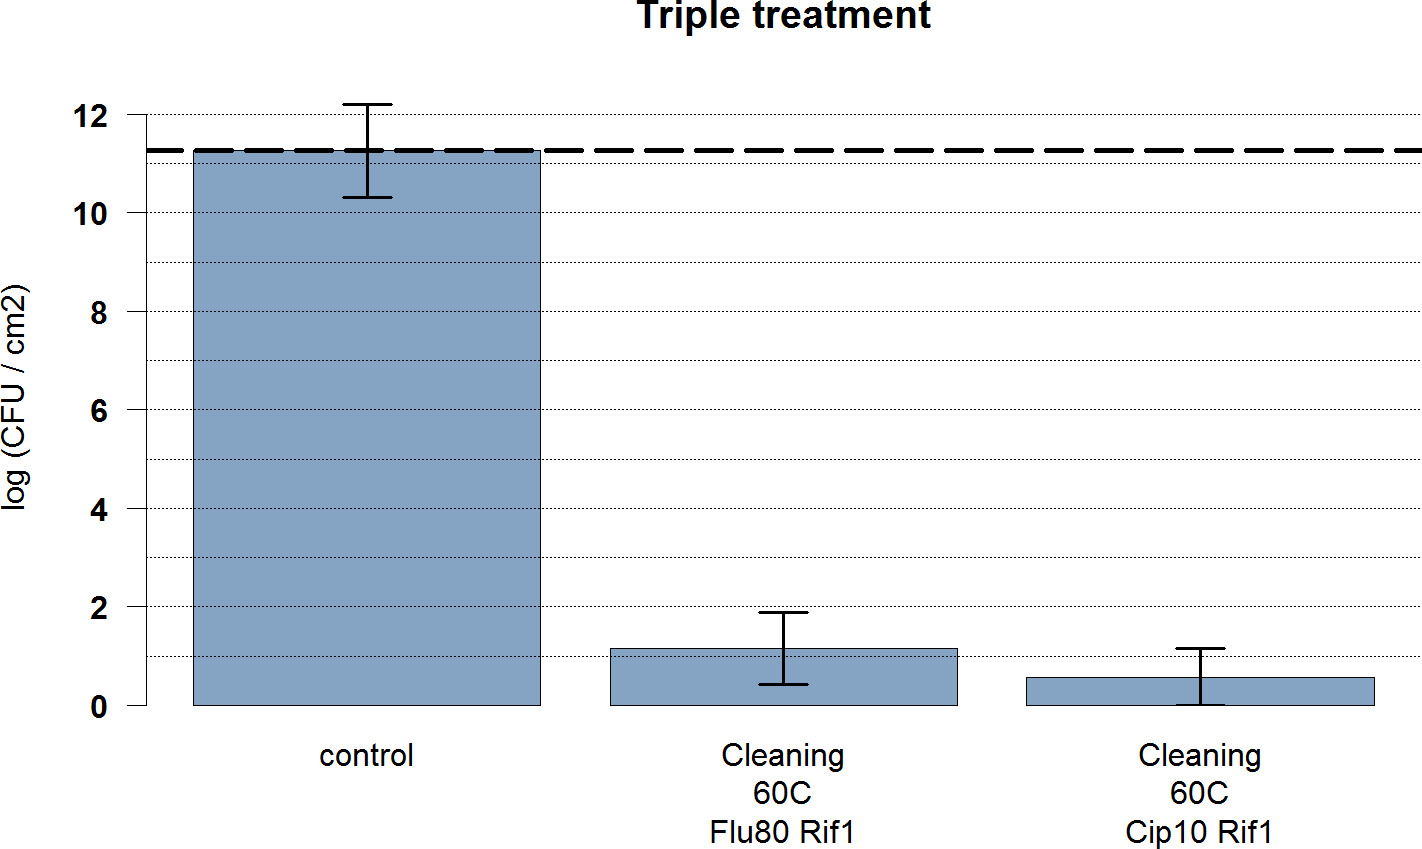 Fig. 5 
            Seven- to eight-day biofims: graph showing the log colony-forming units (CFUs) that remain for seven-day Staphylococcus aureus biofilms after combination of all three (triple) treatments. The dashed line represents the control. Mean and 95% confidence intervals are presented. ‘Cleaning’ refers to mechanical cleaning. 60C, induction heating to 60°C for one minute; Cip10Rif1, ciprofloxacin 10 mg/l + rifampicin 1 mg/l; Flu80Rif1, flucloxacillin 80 mg/l + rifampicin 1 mg/l.
          